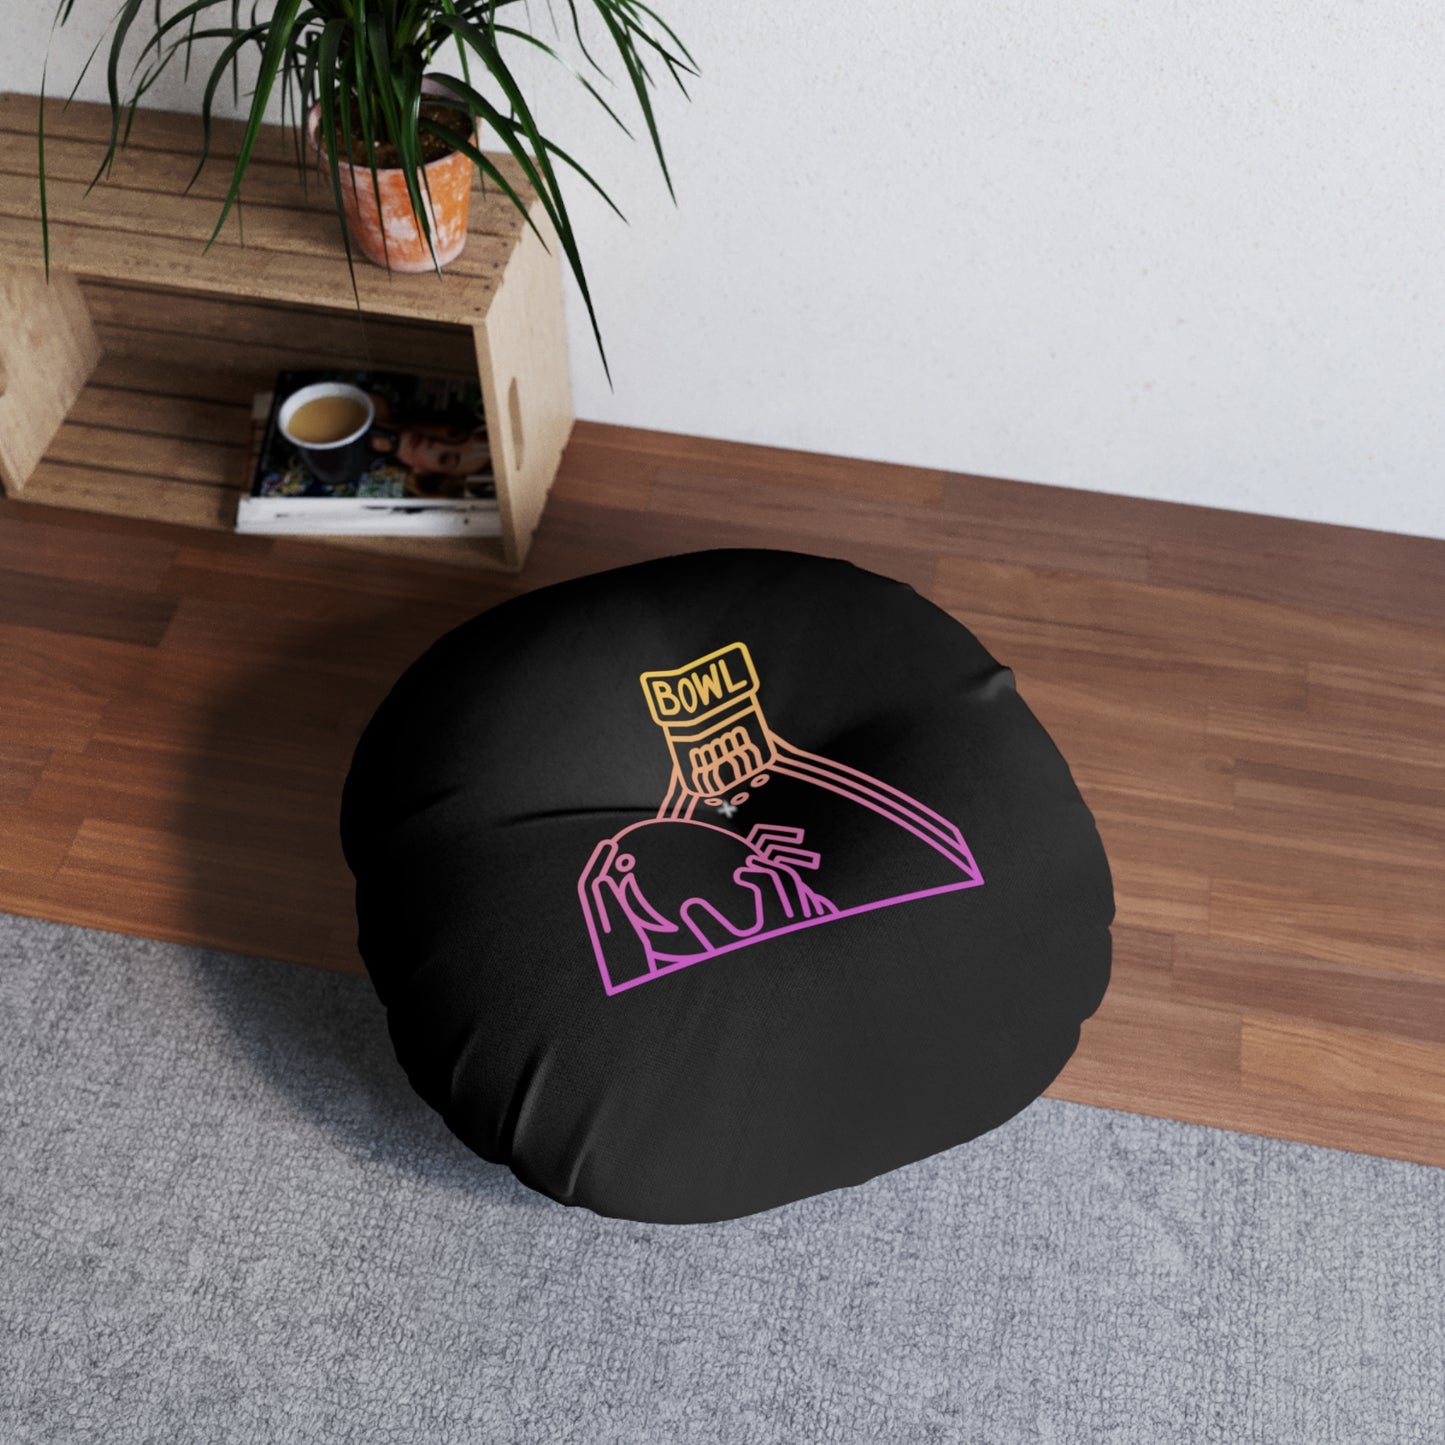 Tufted Floor Pillow, Round: Bowling Black